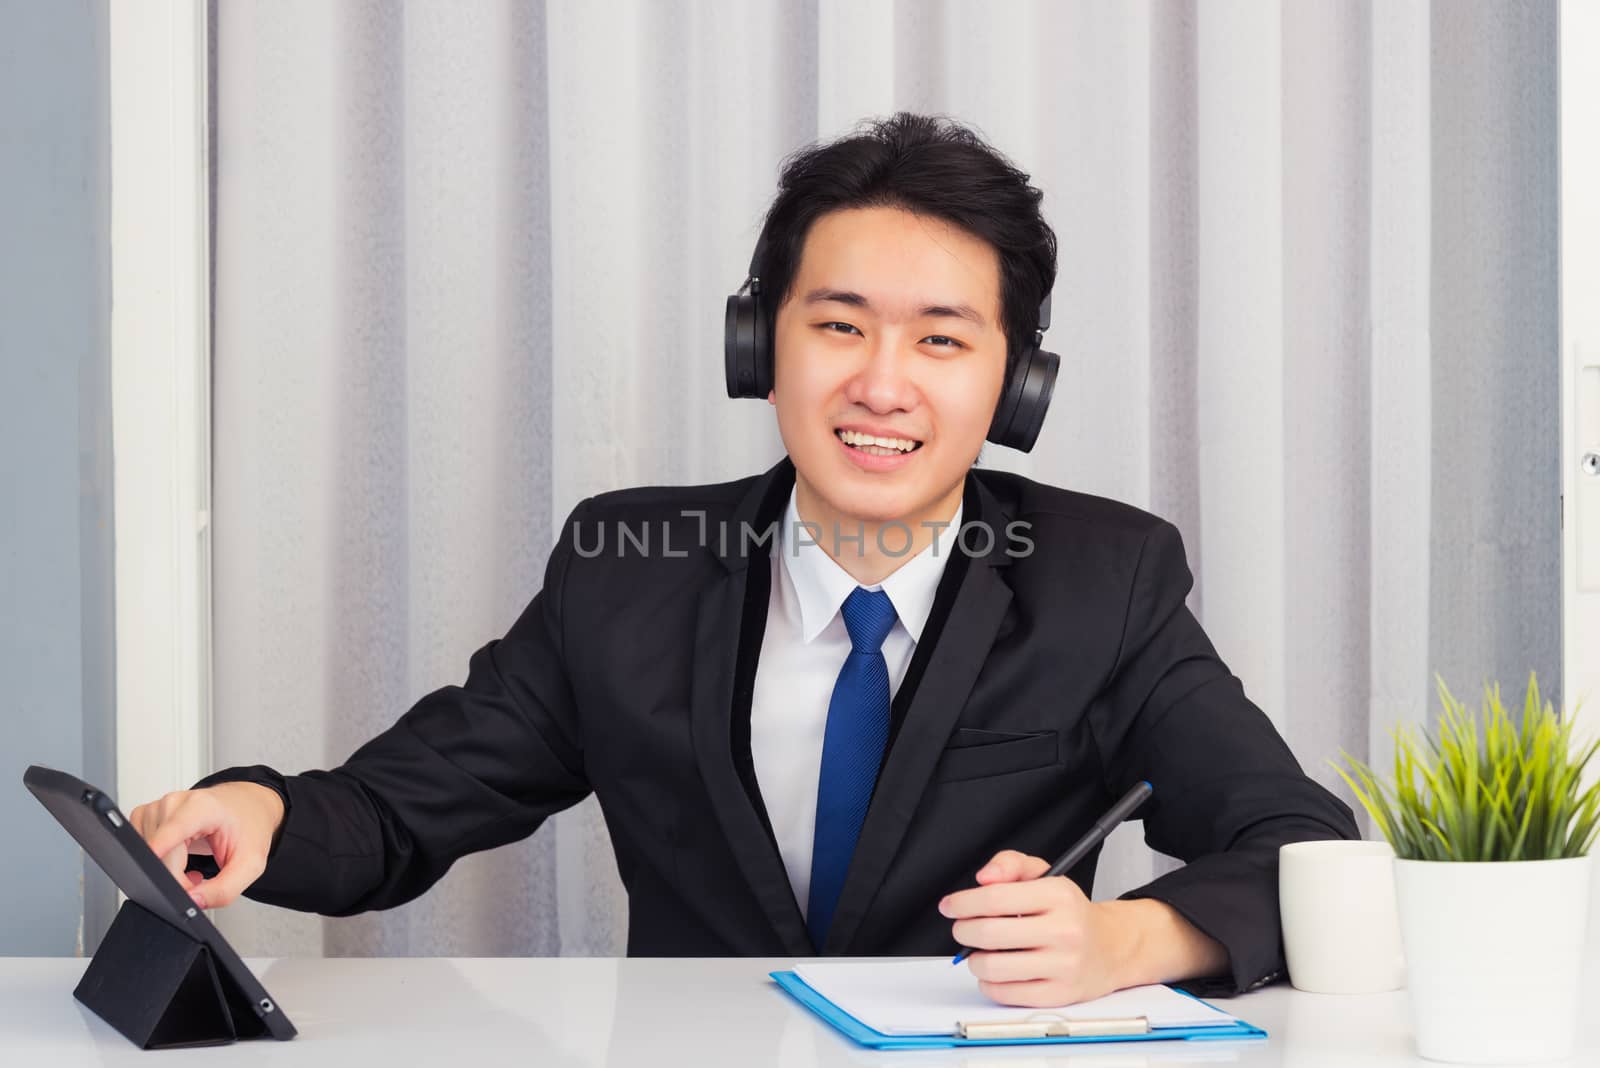 Businessman video conference using tablet computer at home offic by Sorapop